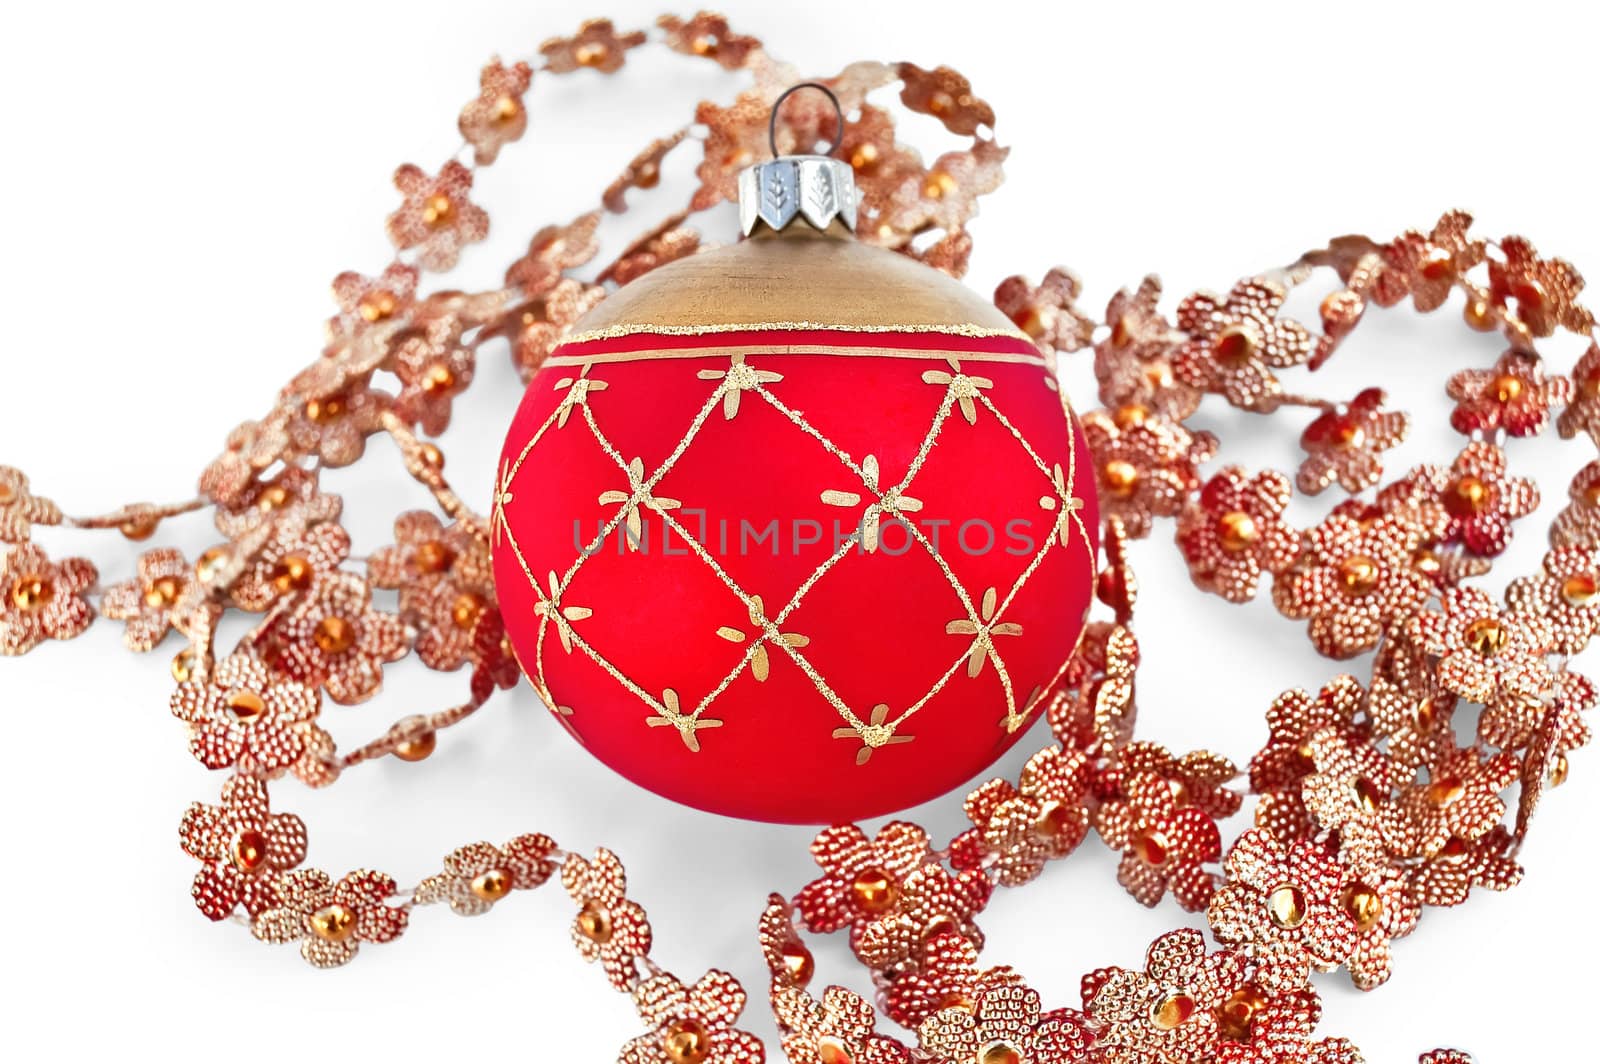 Christmas red ball with golden ornaments, shiny Christmas tree pendants in the shape of flowers isolated on white background